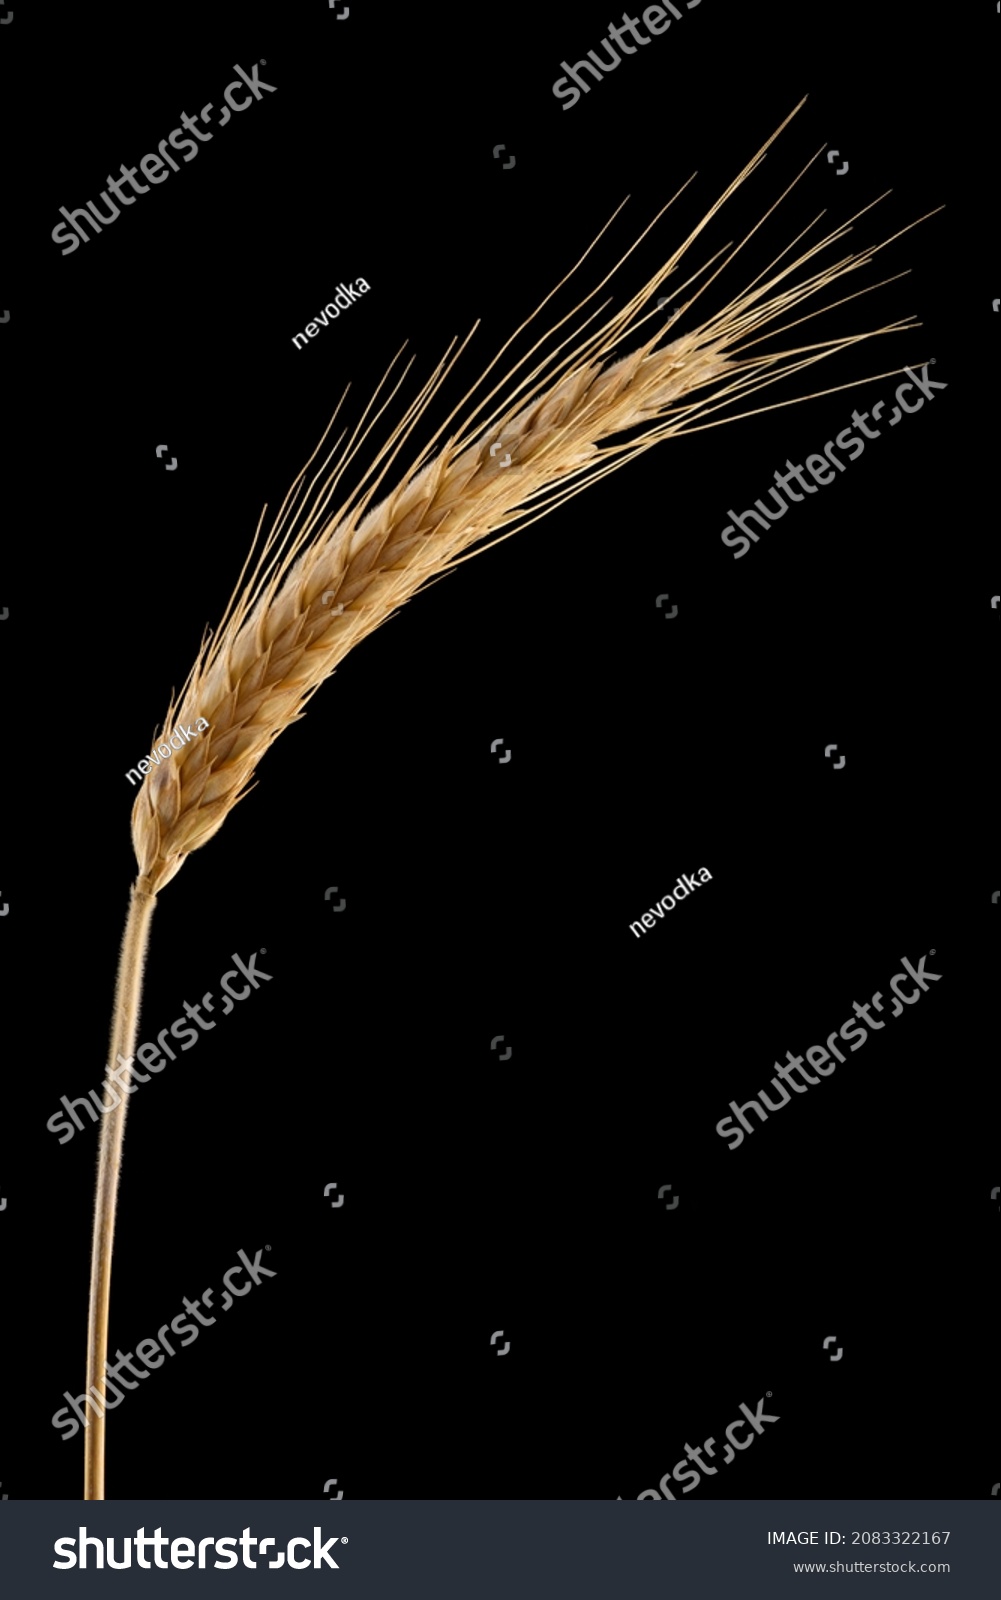 Ripe dried spikelet of barley isolated close-up on a black background. Macro single ear of grain with leaf. #2083322167